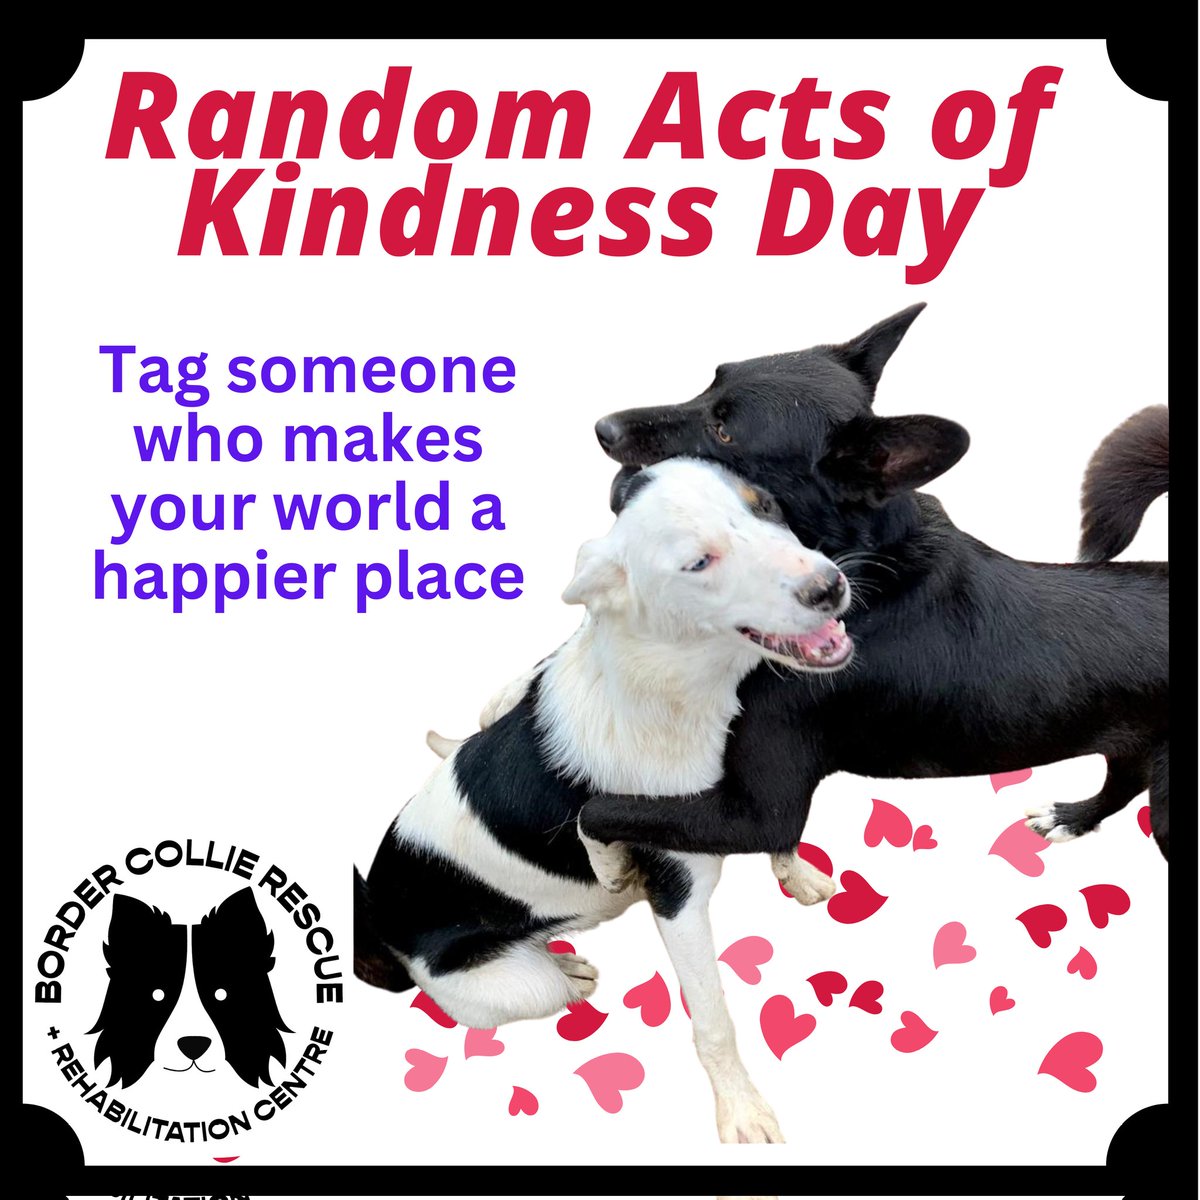 Today is #RandomActsofKindnessDay

Why not tag someone who makes your world a happier place 🥰 and tell them why 😍

#RandomActofKindnessDay #BeKind #KindnessMatters